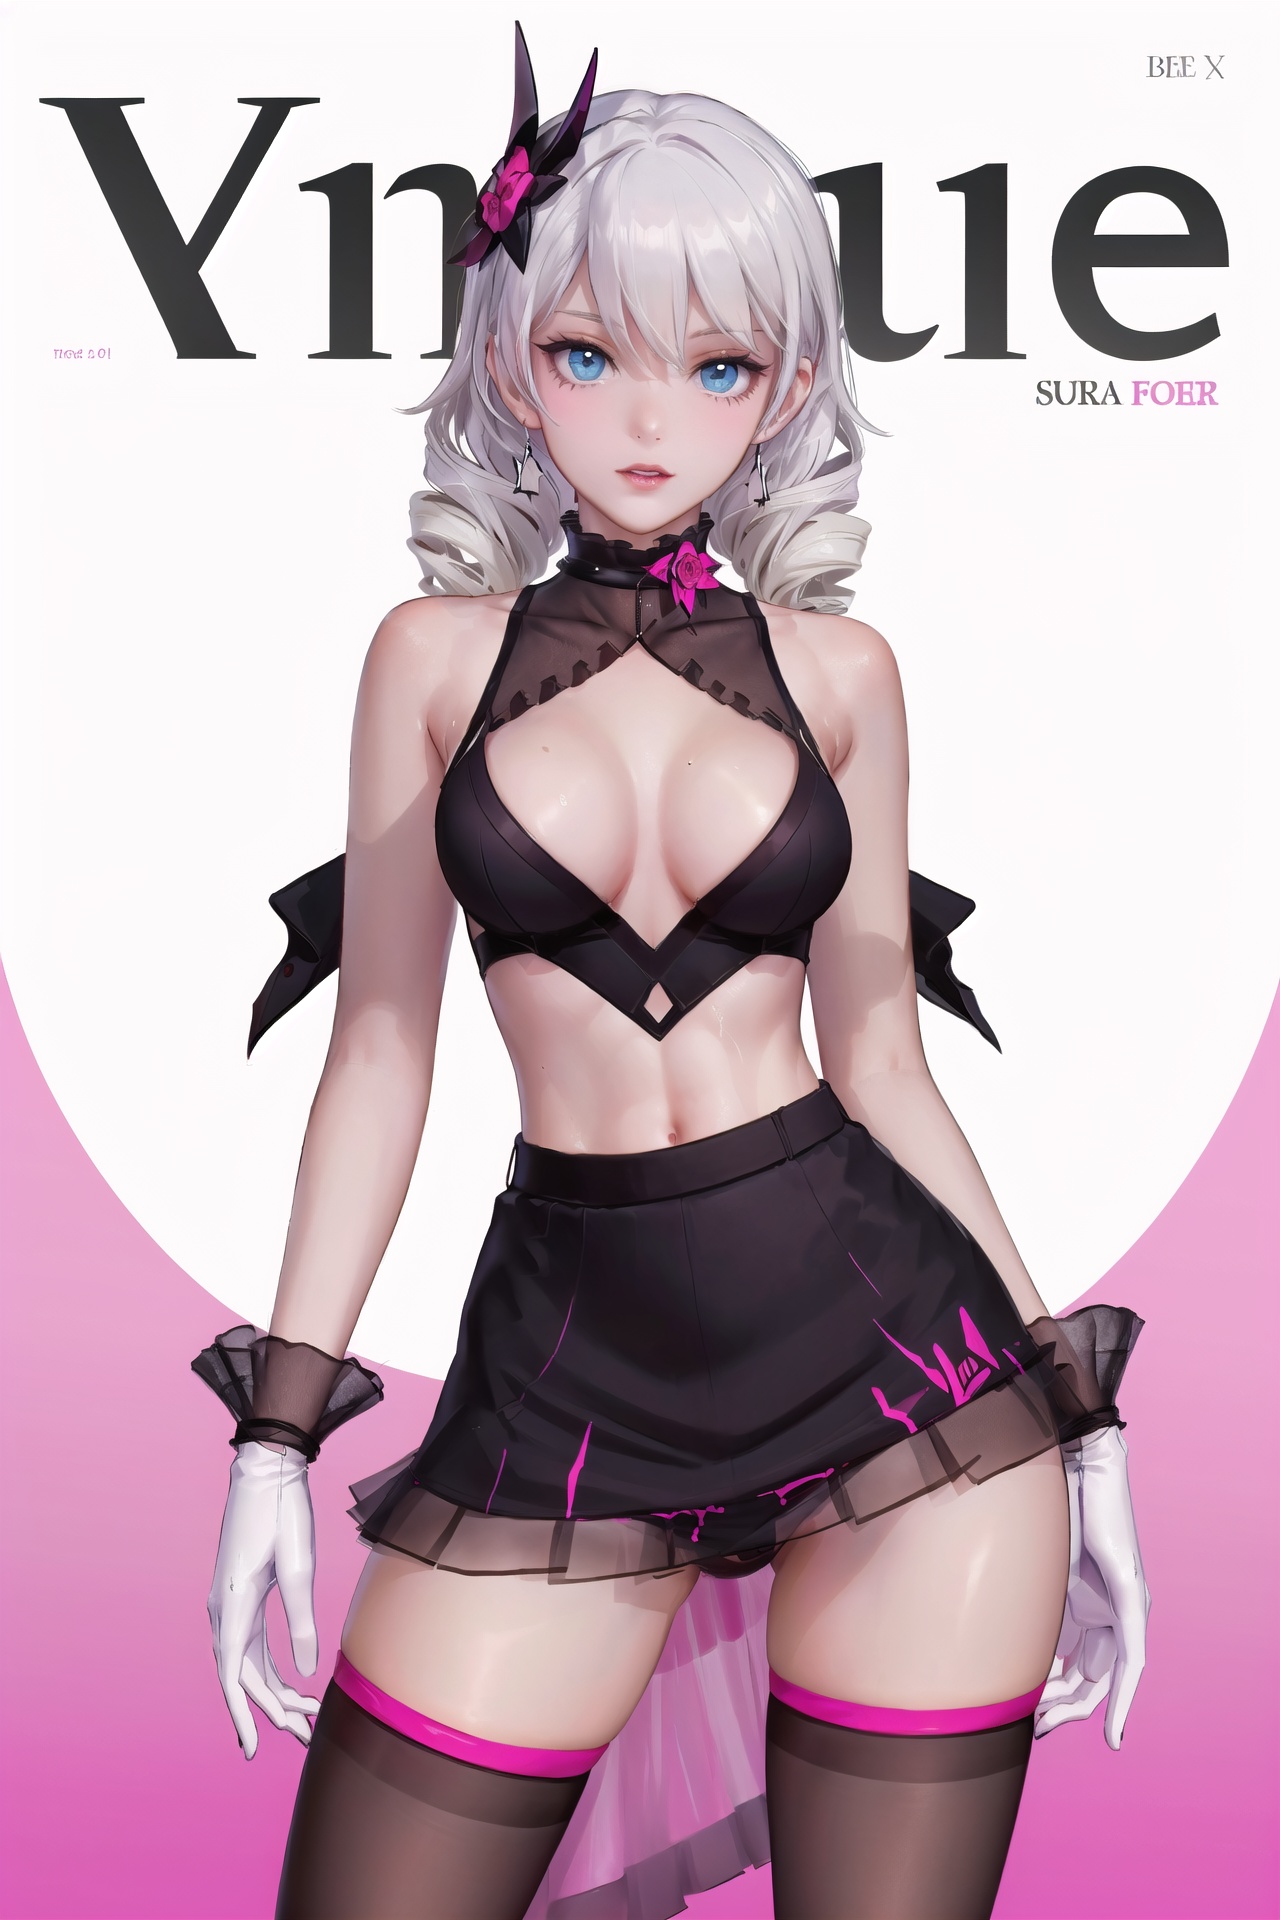  
best quality), (ultra detailed), ((masterpiece)), sfw,consored,illustration, ray tracing,contrapposto, female focus,model, /////////////////// (geji: geji, pink stockings, black skirt, twin drills, pink thigh-high stockings, white gloves, see-through:1.1), blue eyes, long white hair, bangs,, ////////////////////////// sexy, fine fabric emphasis,wall paper, crowds, fashion, Lipstick, depth of field, street, in public,(Magazine cover:1.2),(title),(Magazine cover-style illustration of a fashionable woman), posing in front of a colorful and dynamic background. (The text on the cover should be bold and attention-grabbing, with the title of the magazine and a catchy headline).